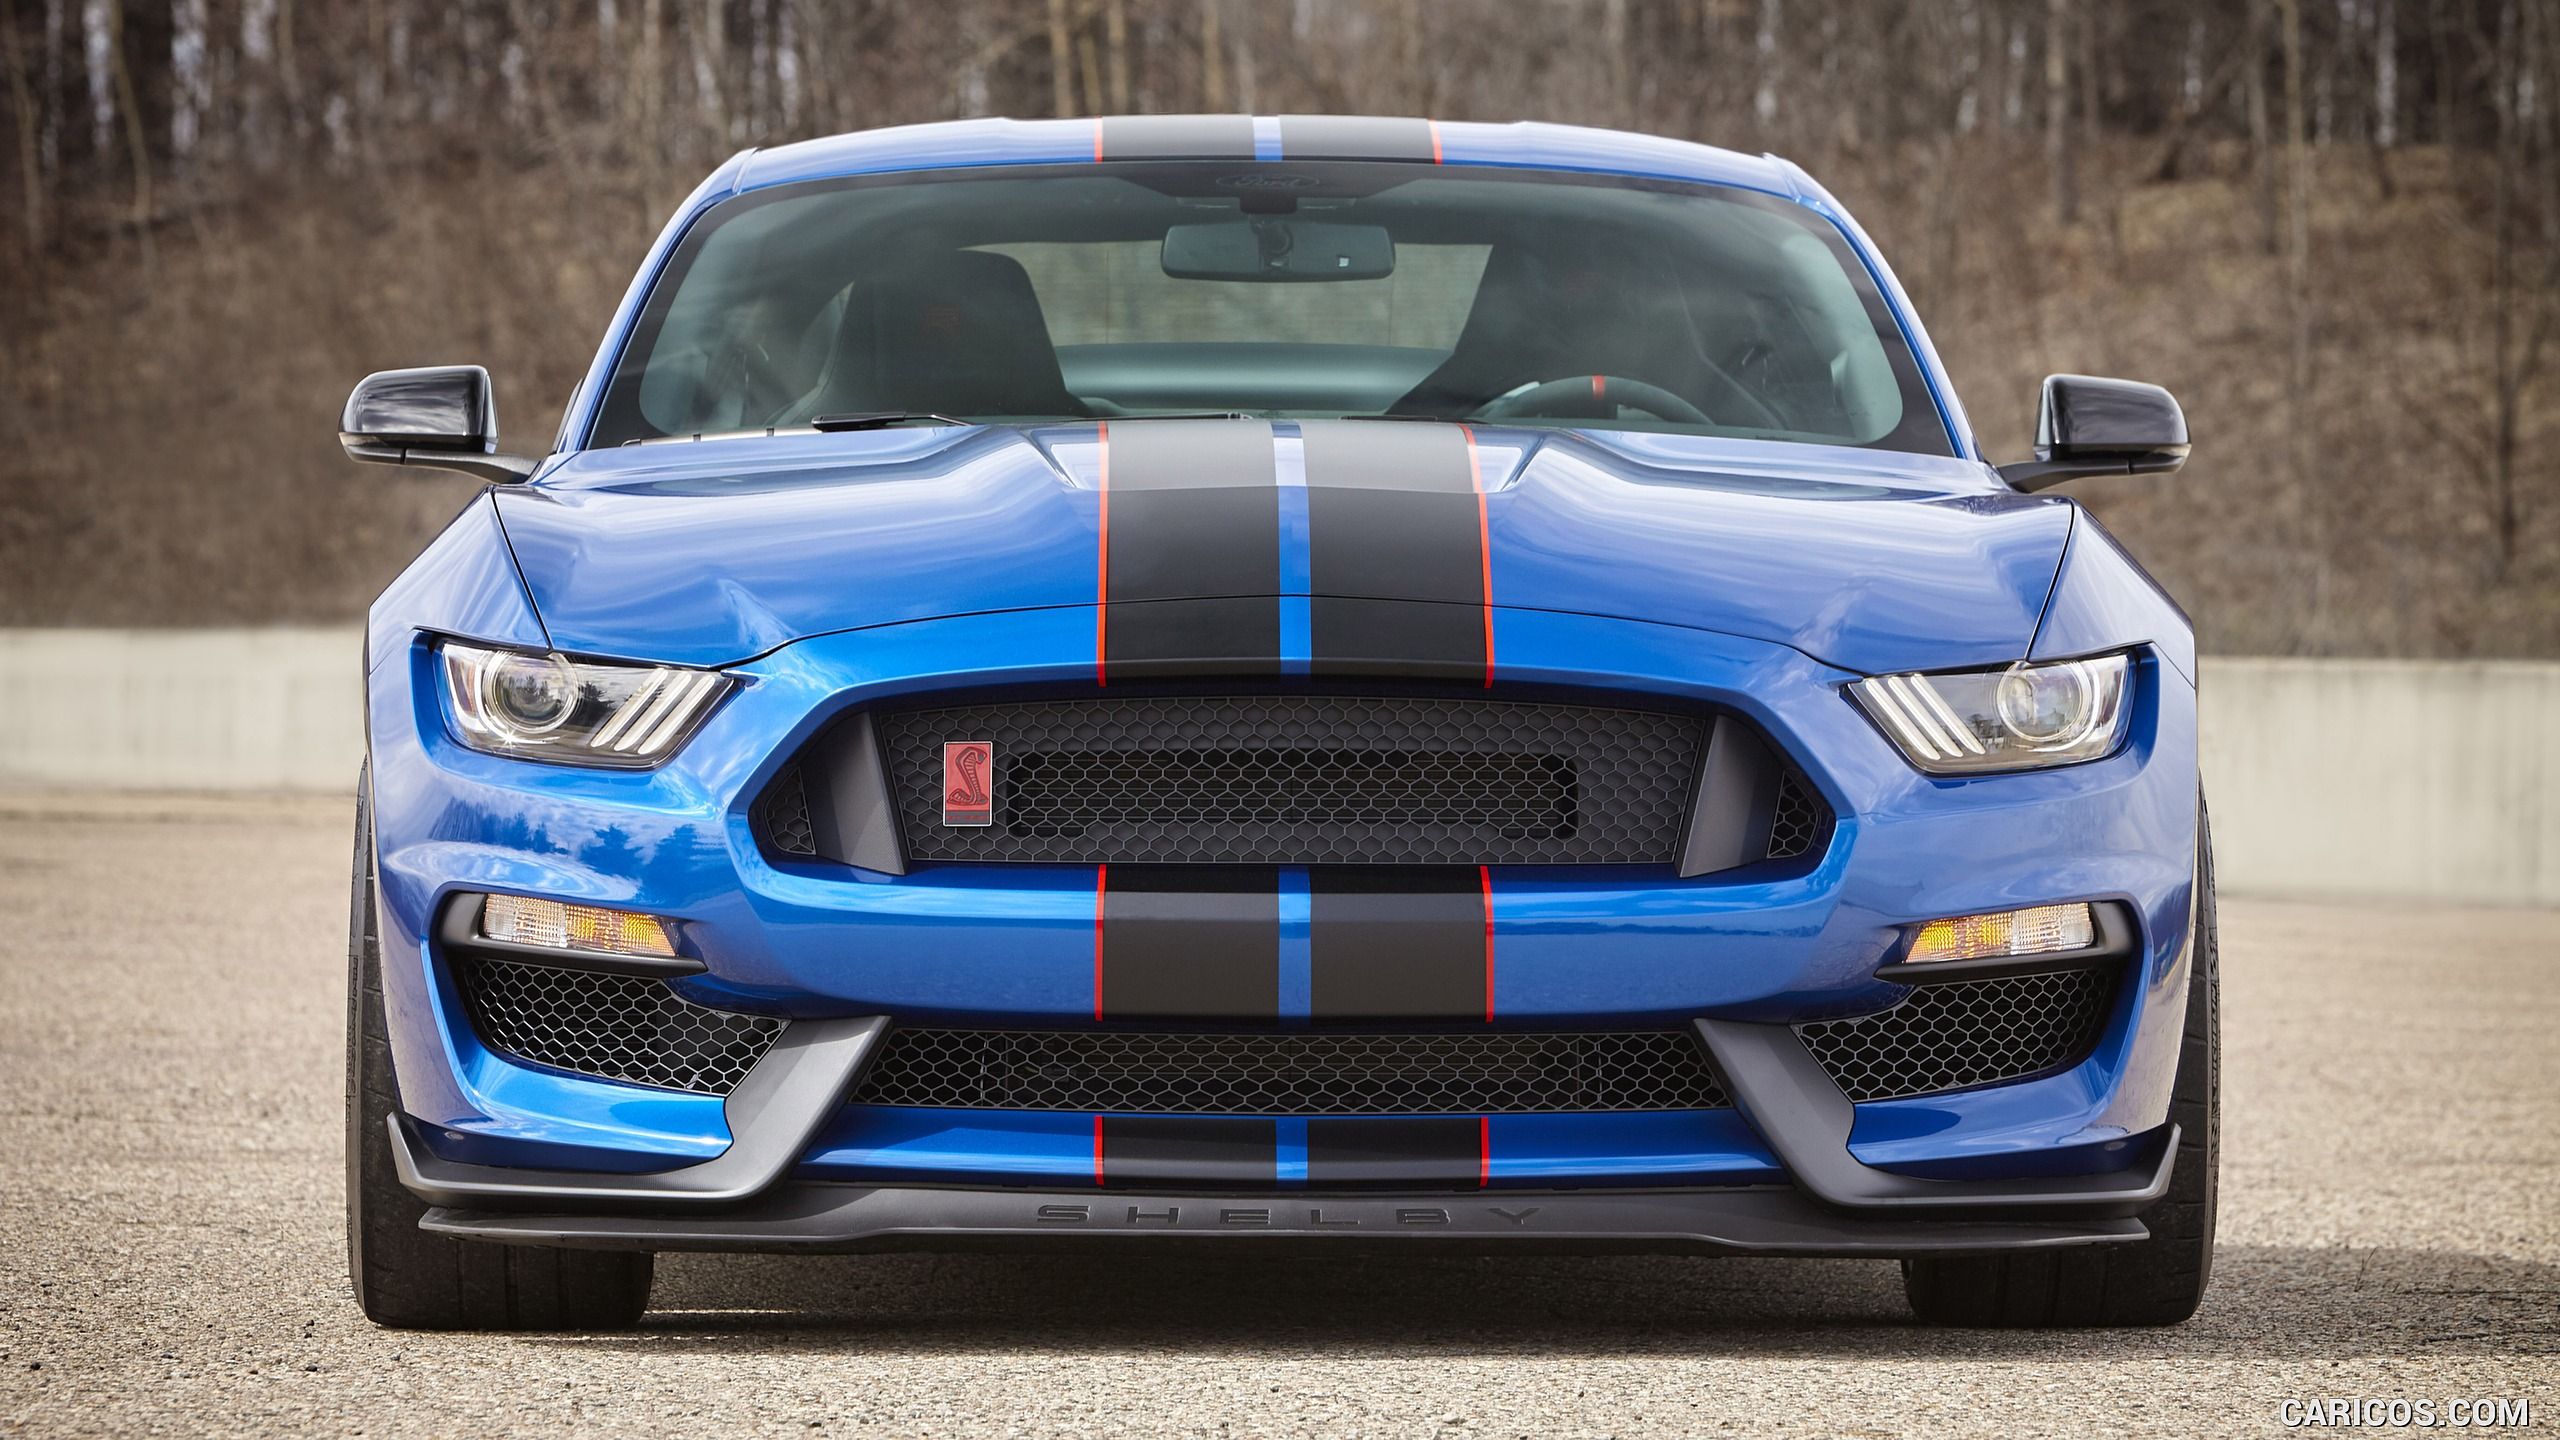 Ford Mustang Shelby GT350 wallpaper | 2400x1600 | 1092787 | WallpaperUP